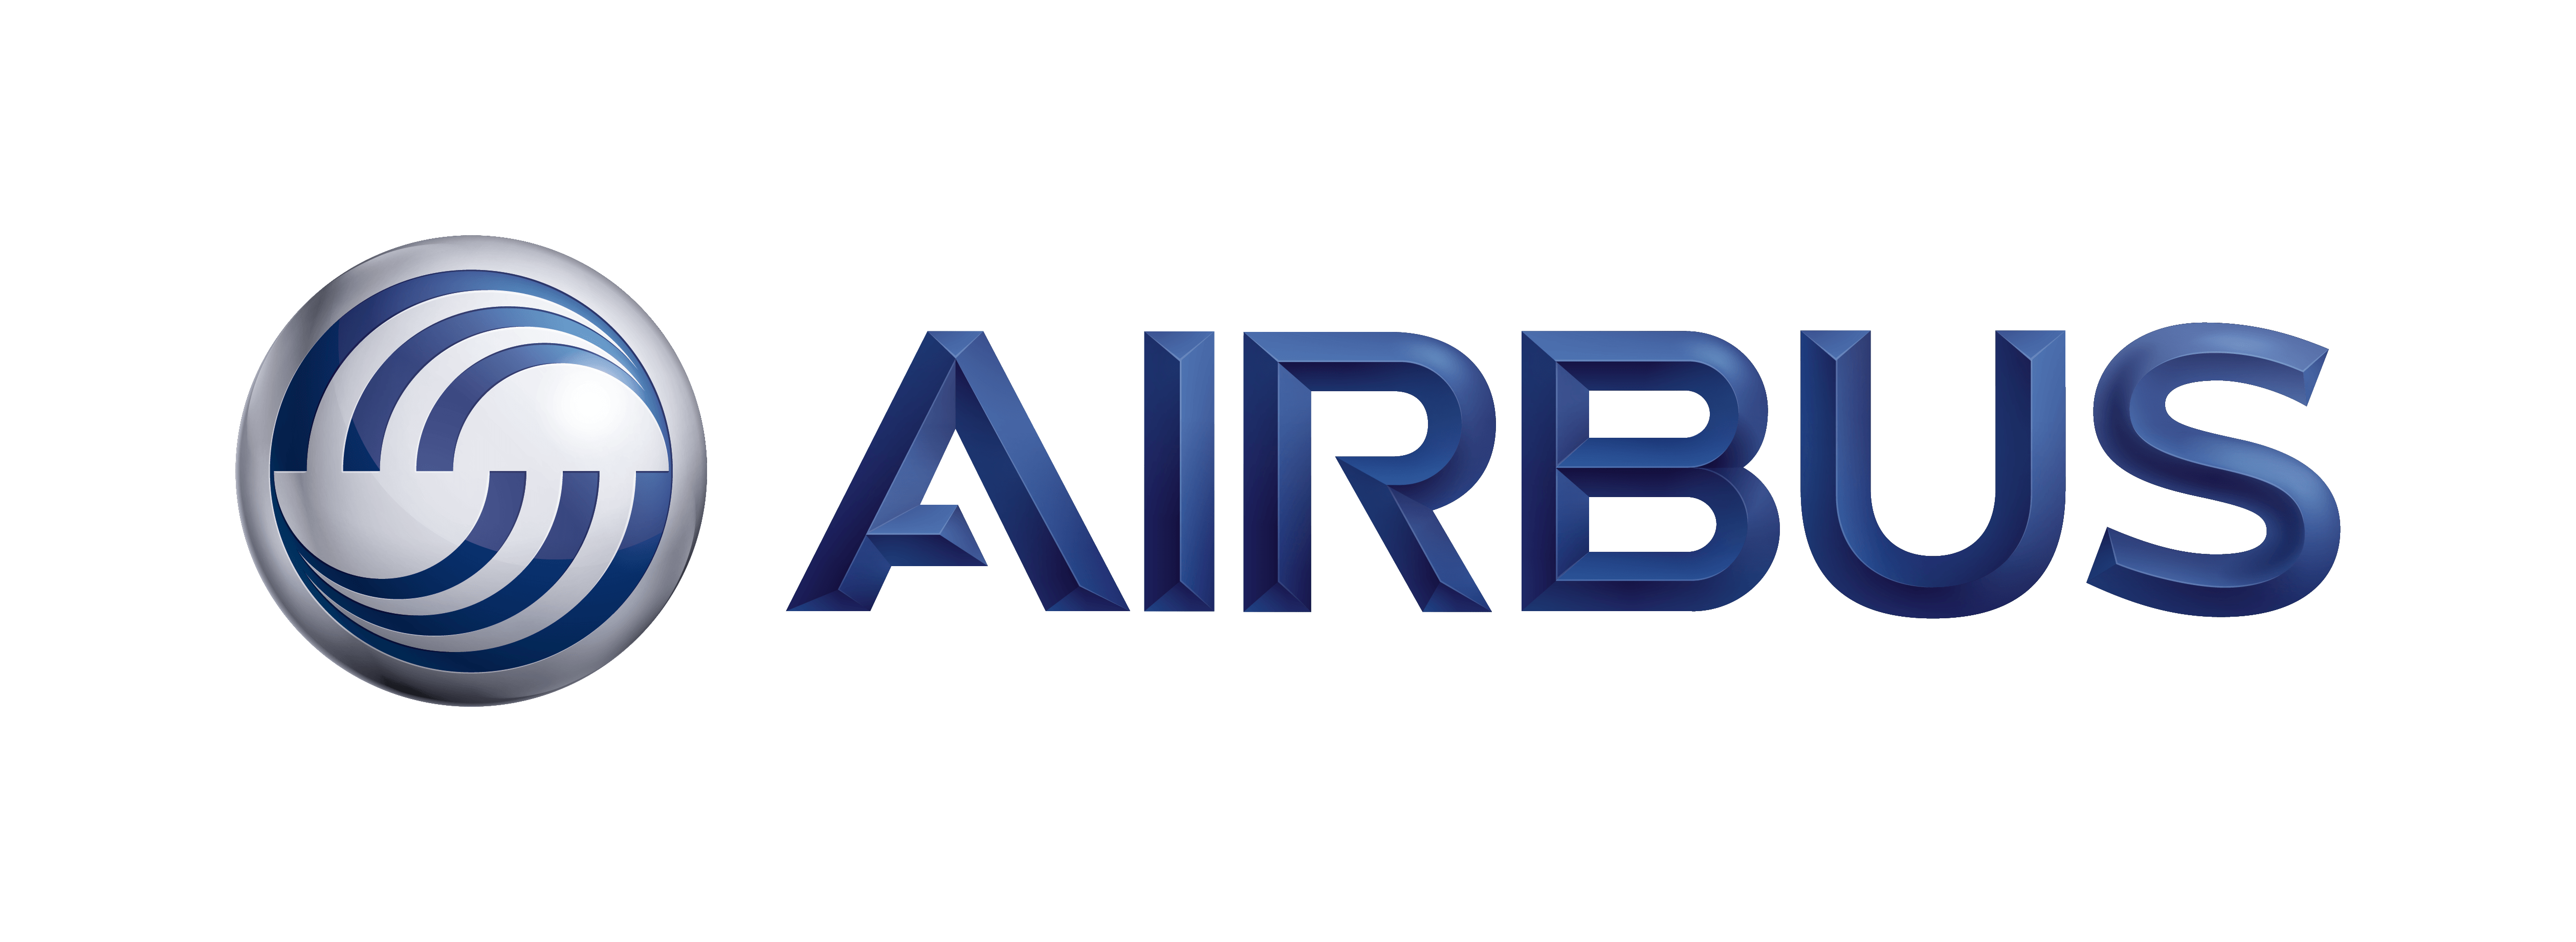 Airbus Logo Wallpapers   Wallpaper Cave - Airbus, Transparent background PNG HD thumbnail